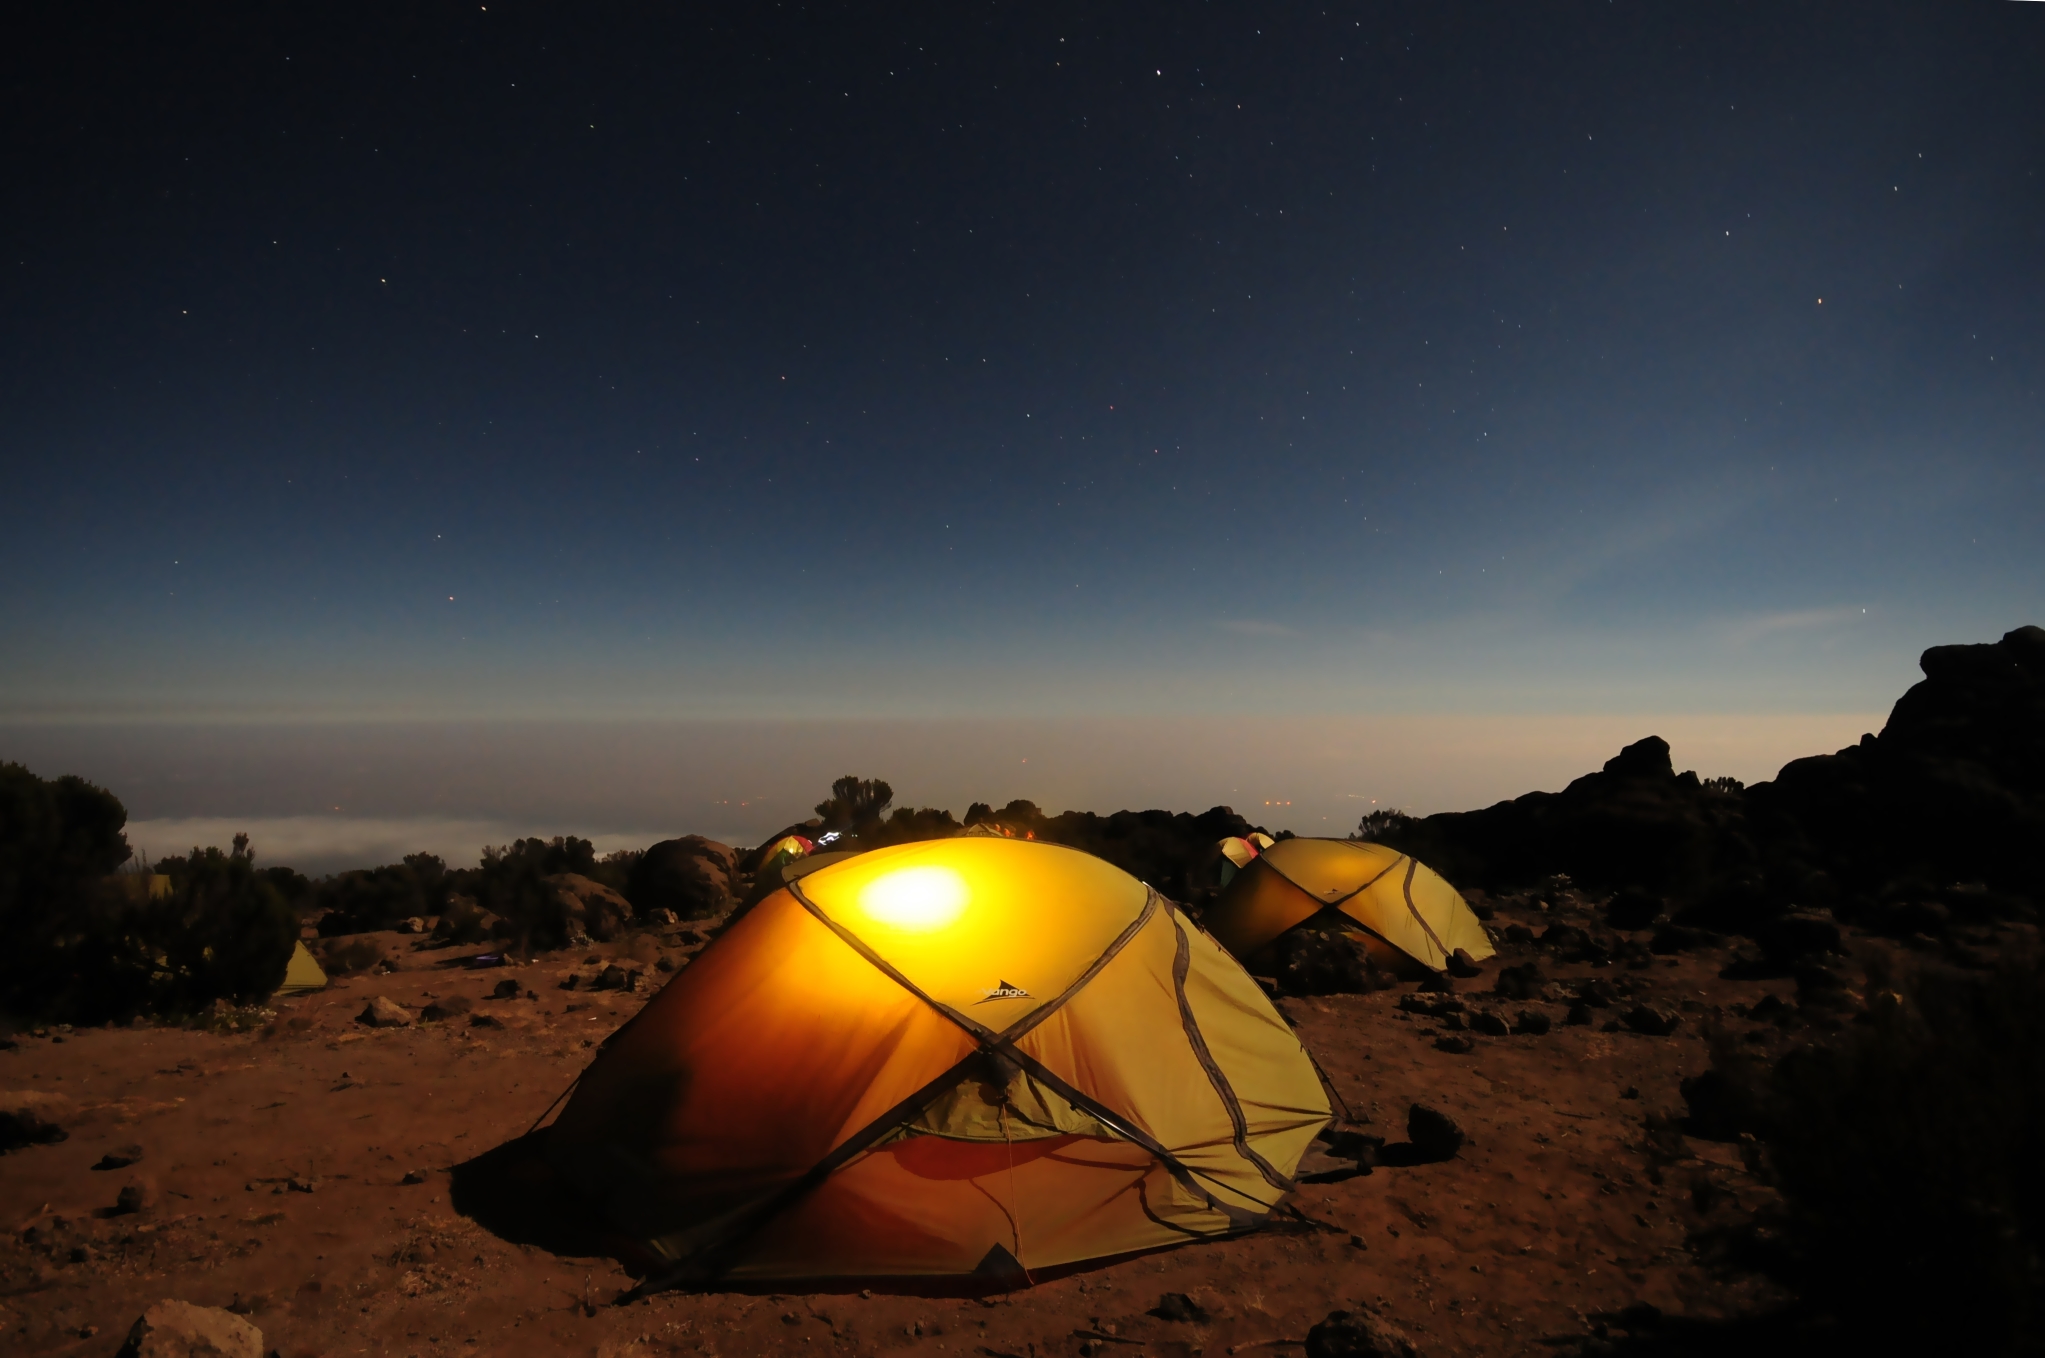 A couple of tents with a nice view of the night sky